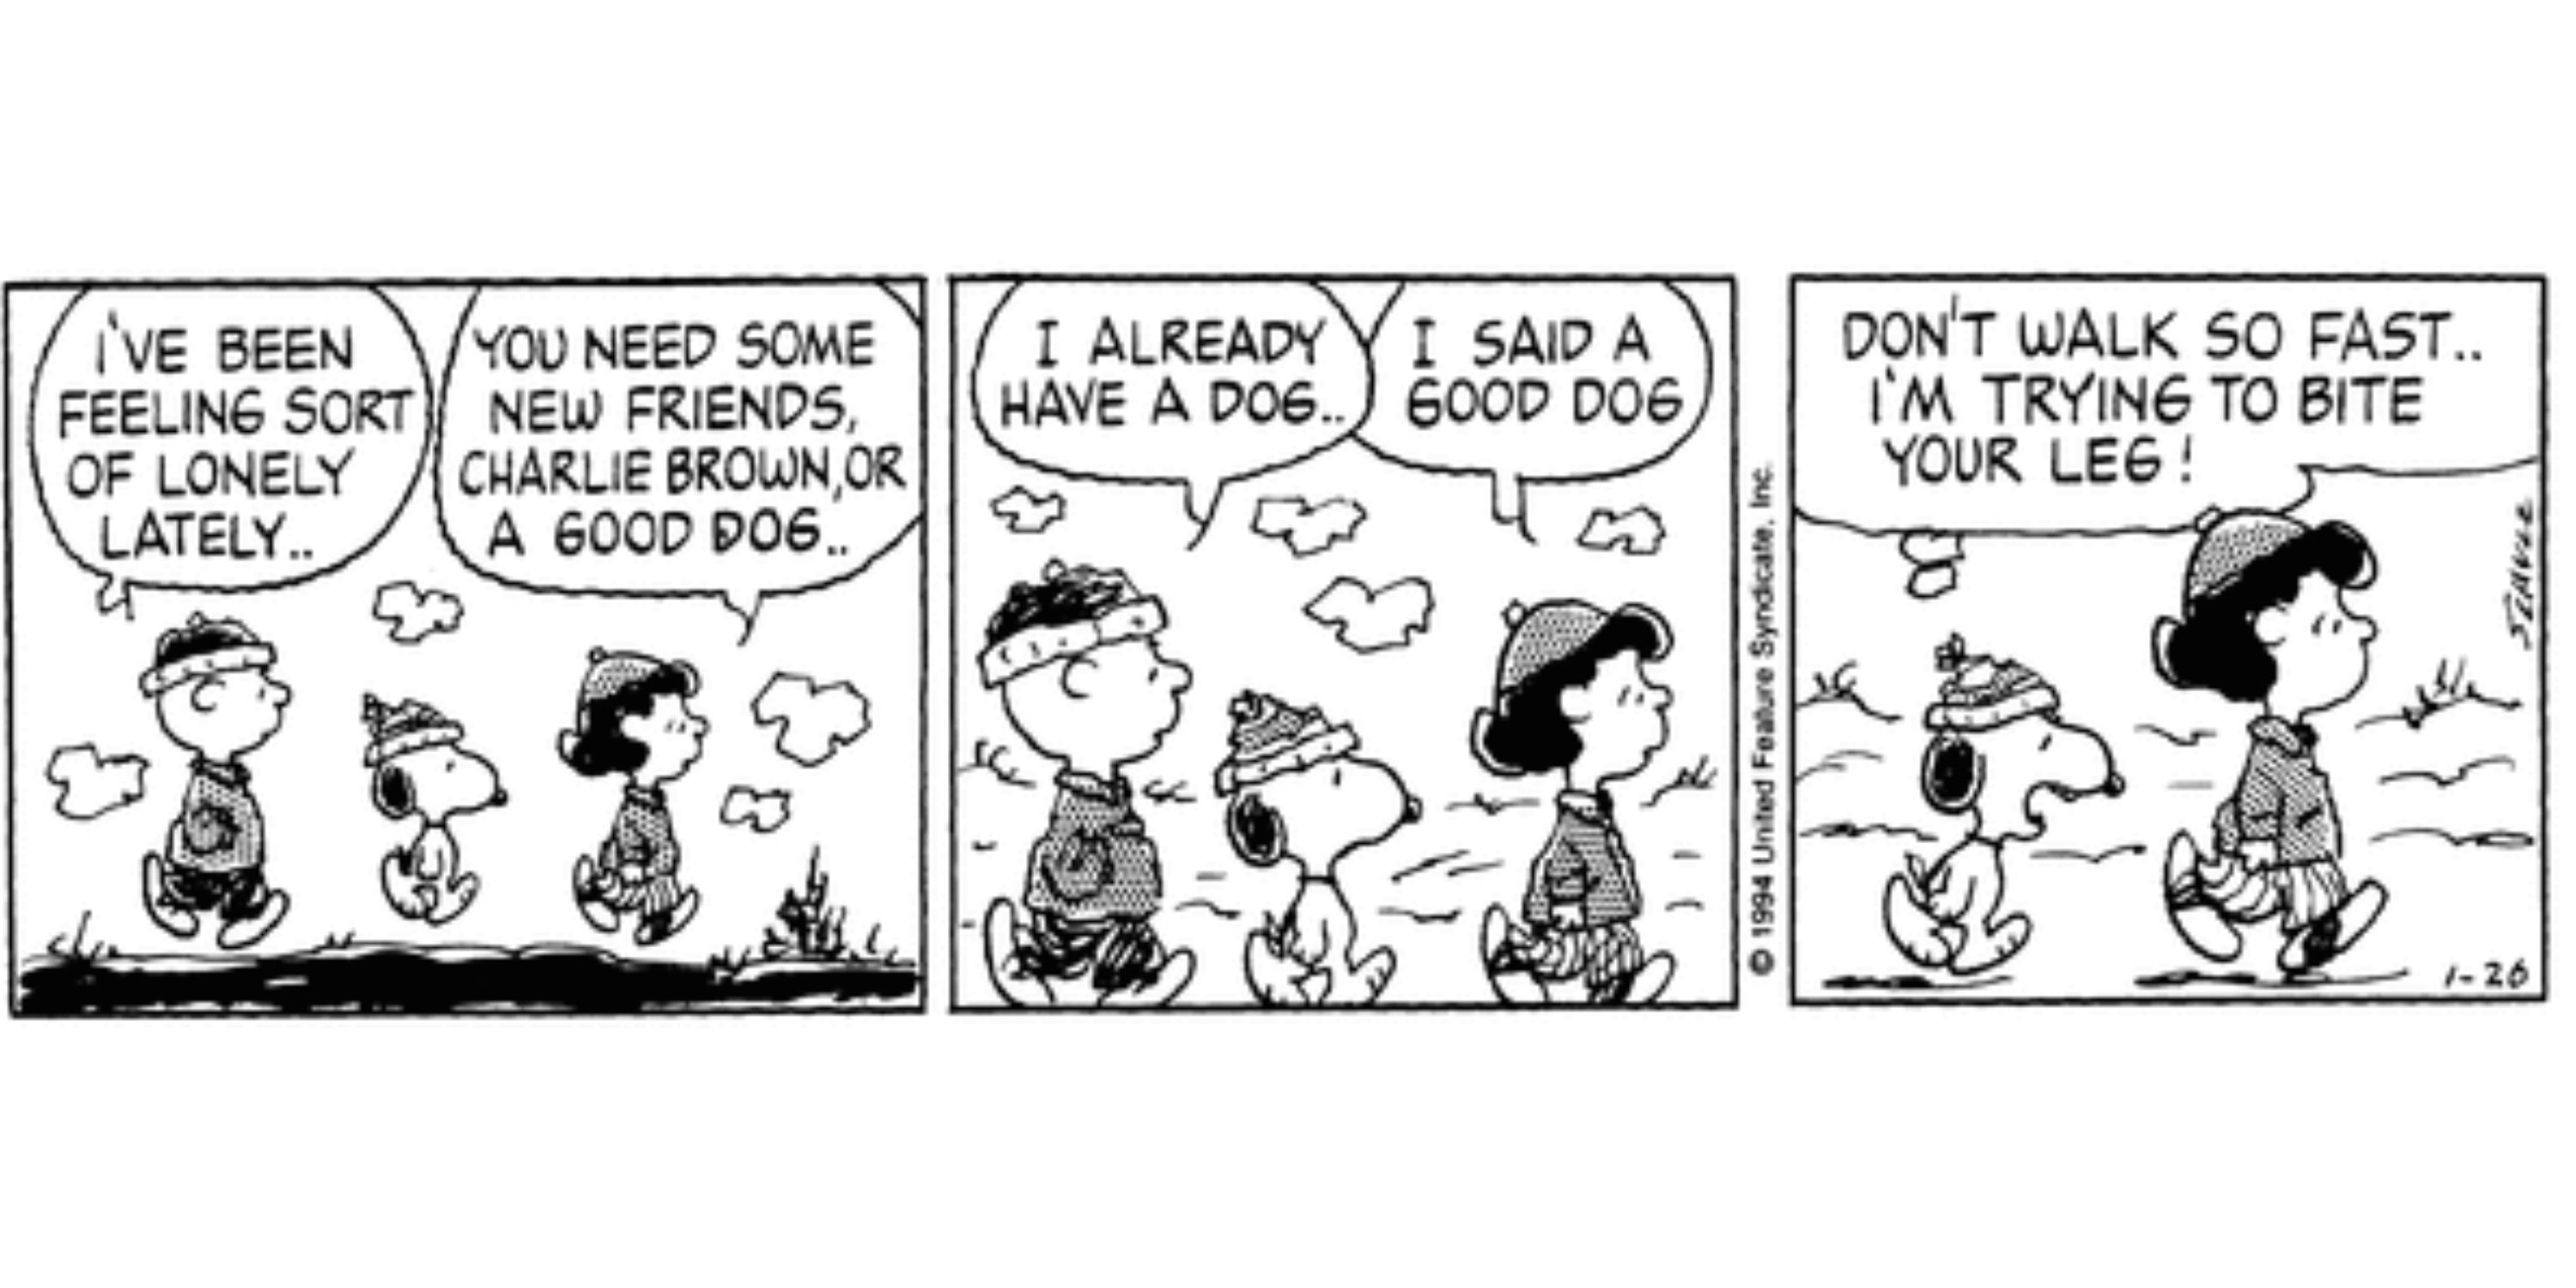 Charlie Brown, Snoopy, and Lucy